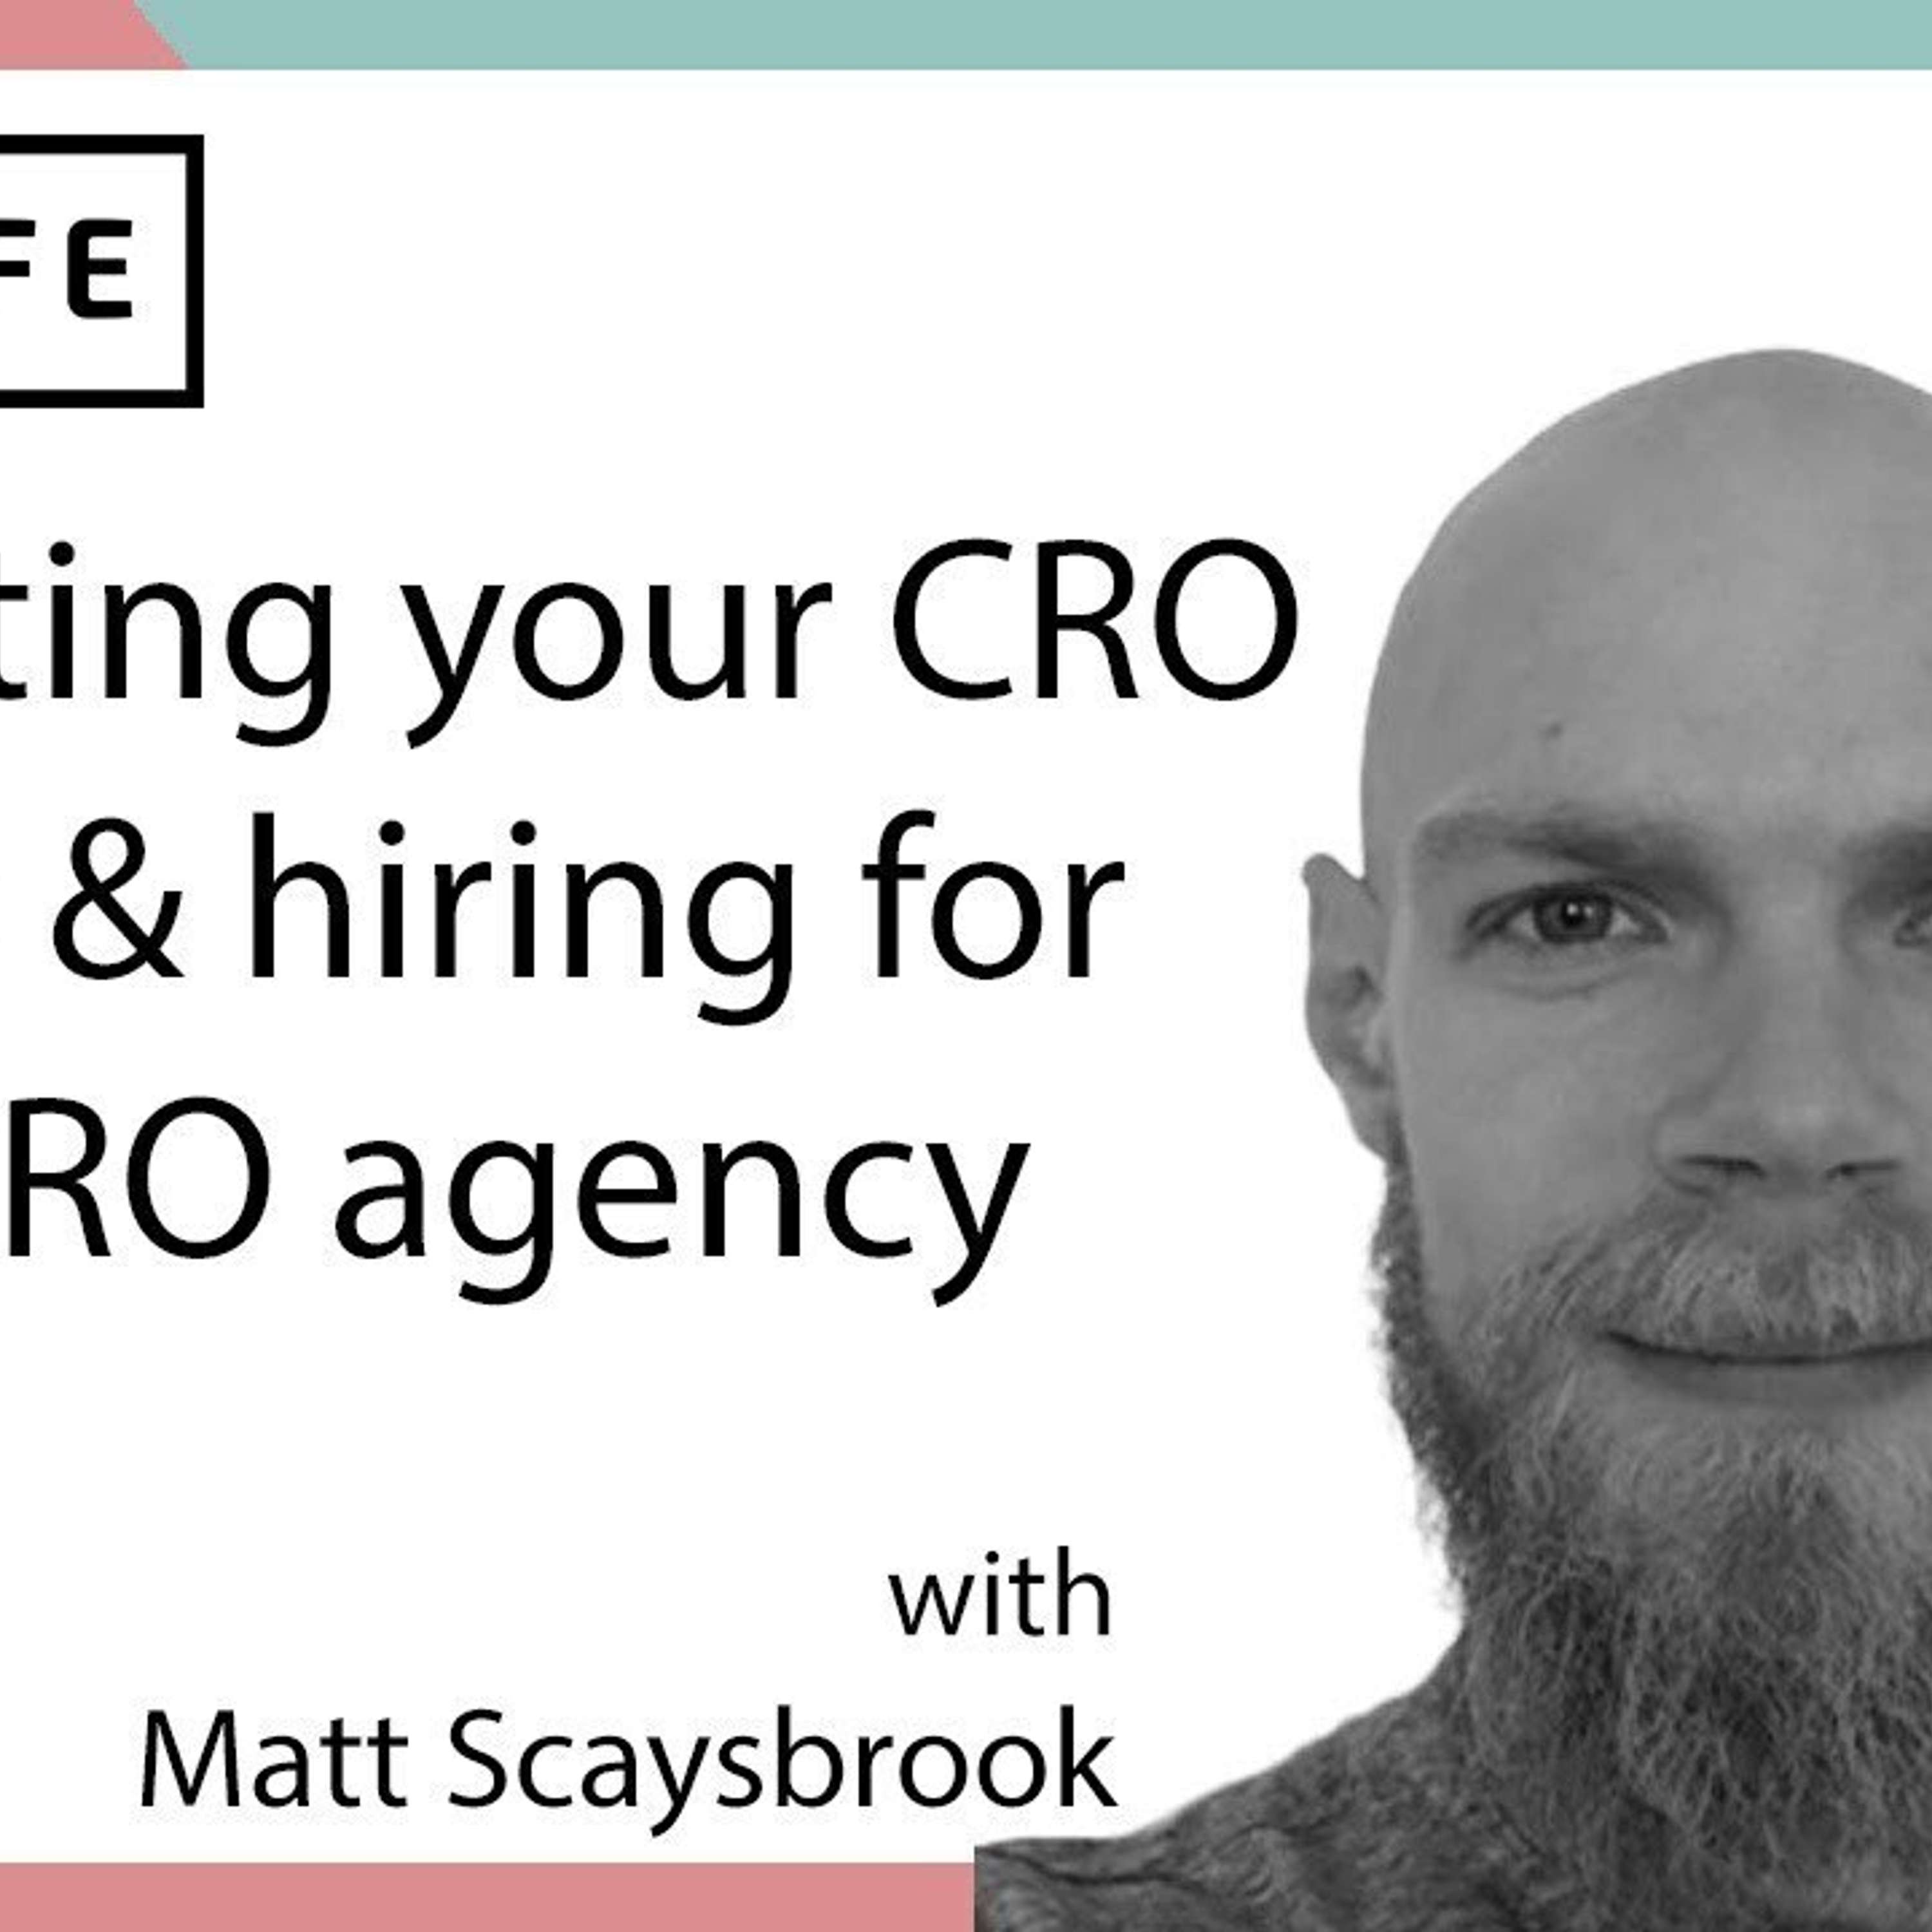 Educating your CRO clients & hiring for your CRO agency